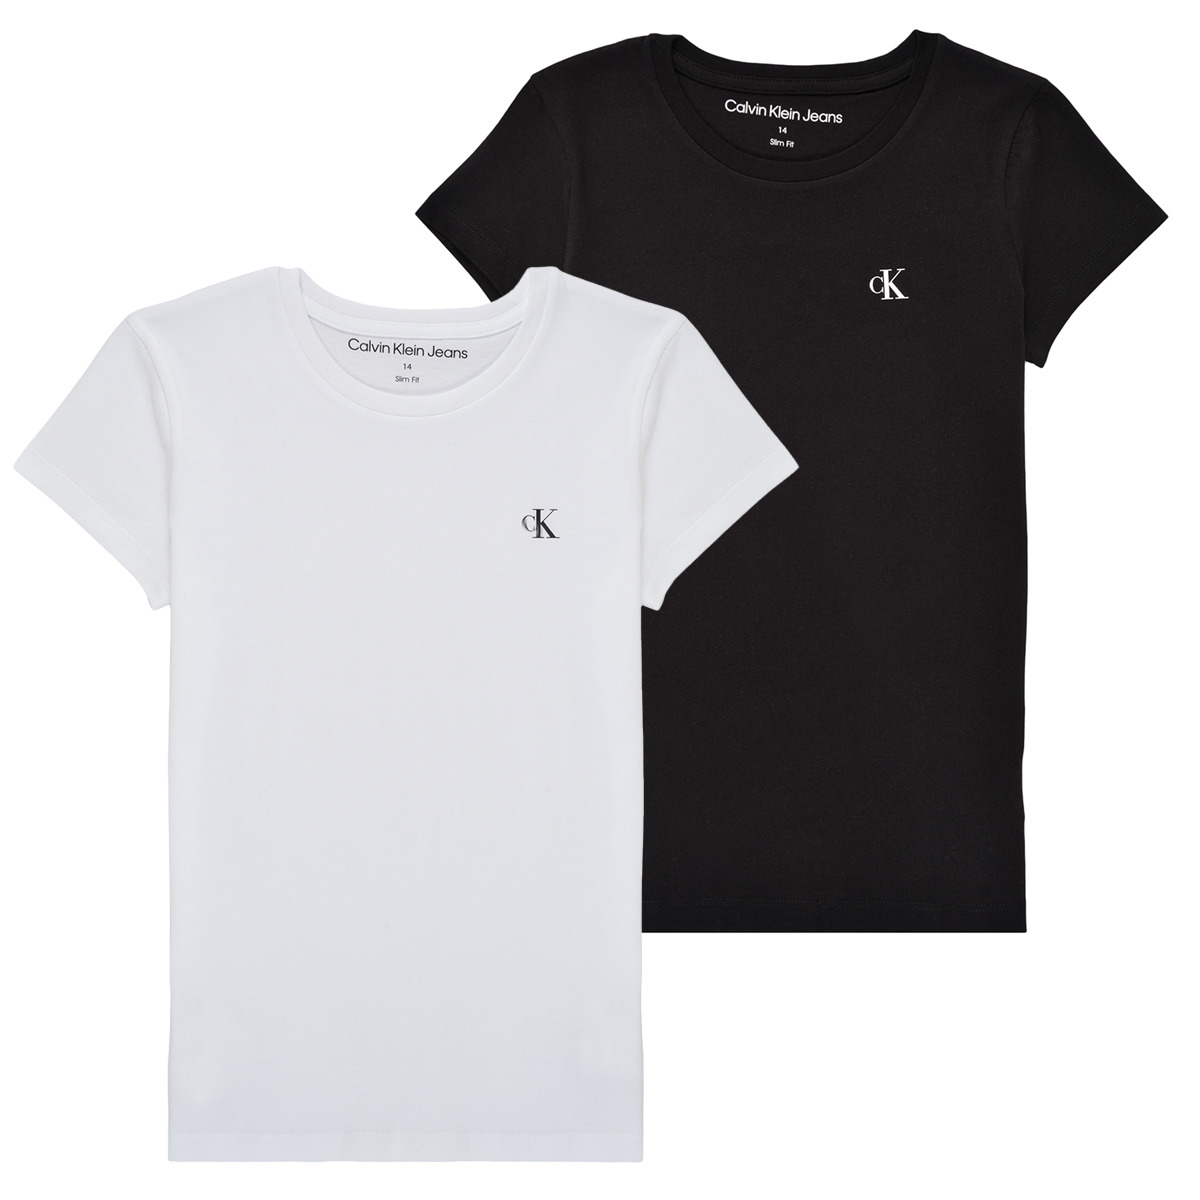 - ! Jeans delivery - Calvin Multicolour Spartoo Child Free TOP short-sleeved MONOGRAM Klein | 2-PACK SLIM NET Clothing t-shirts